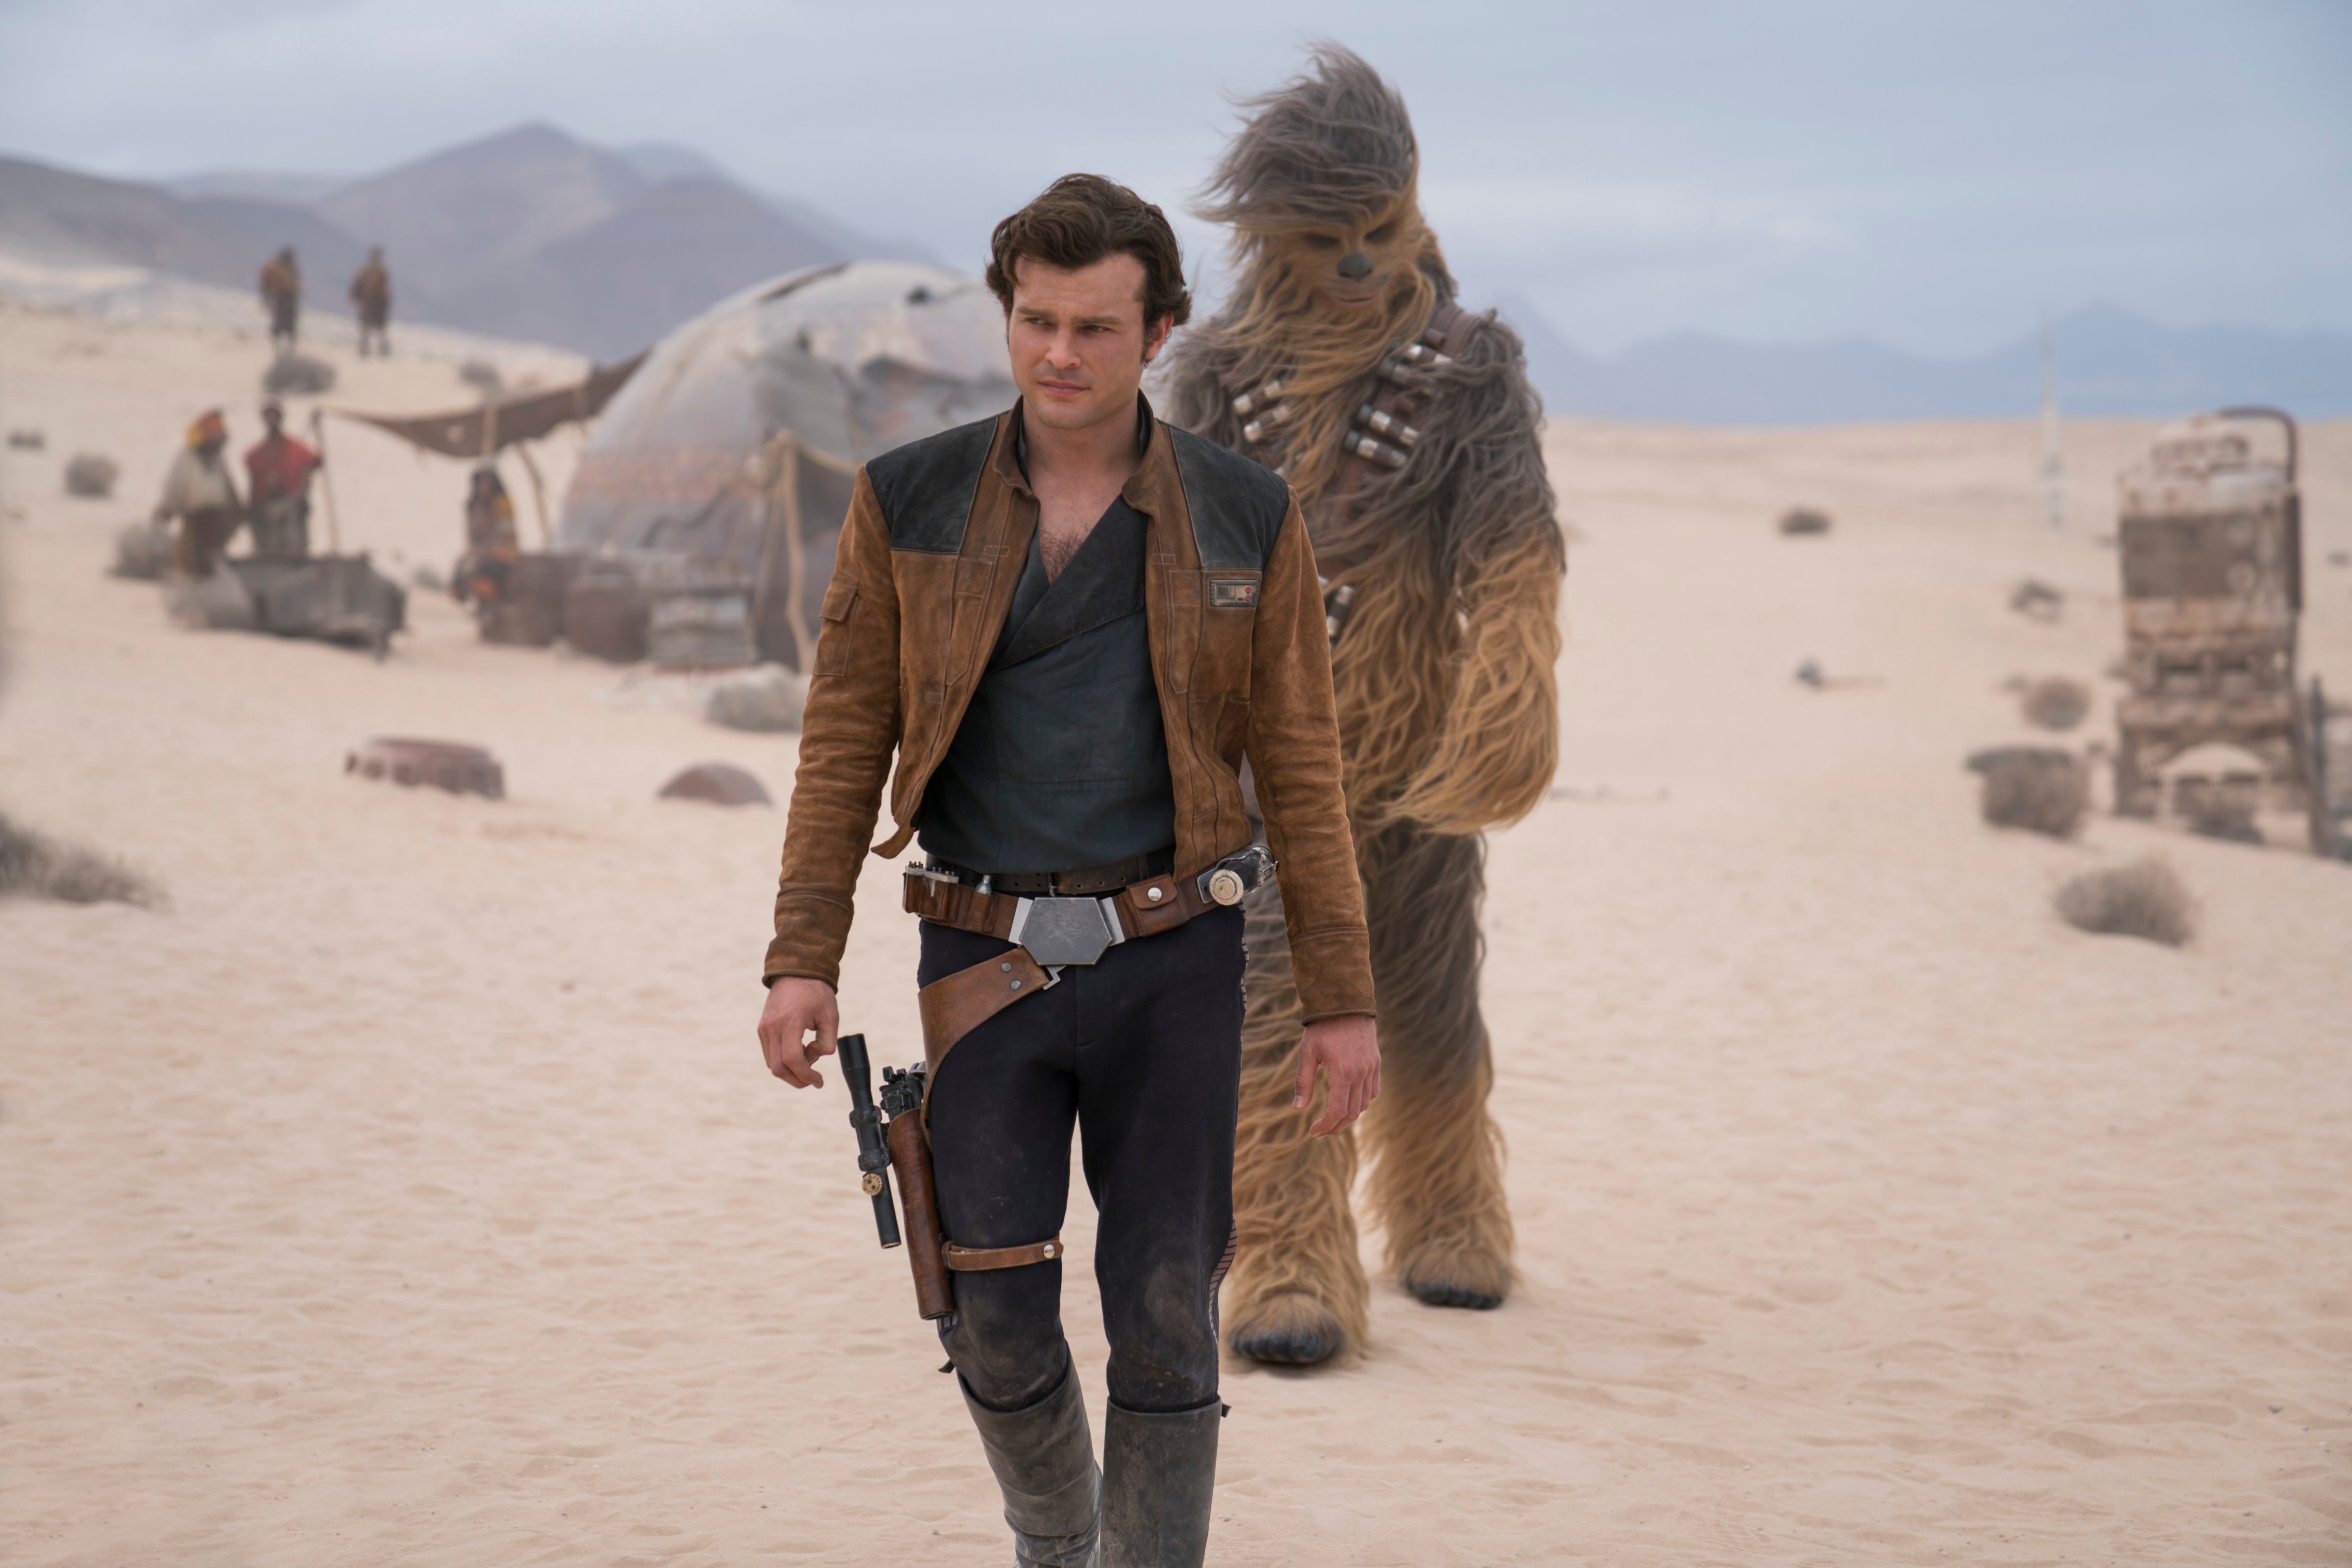 This image released by Lucasfilm shows Alden Ehrenreich and Joonas Suotamo in a scene from "Solo: A Star Wars Story." (Jonathan Olley—AP)